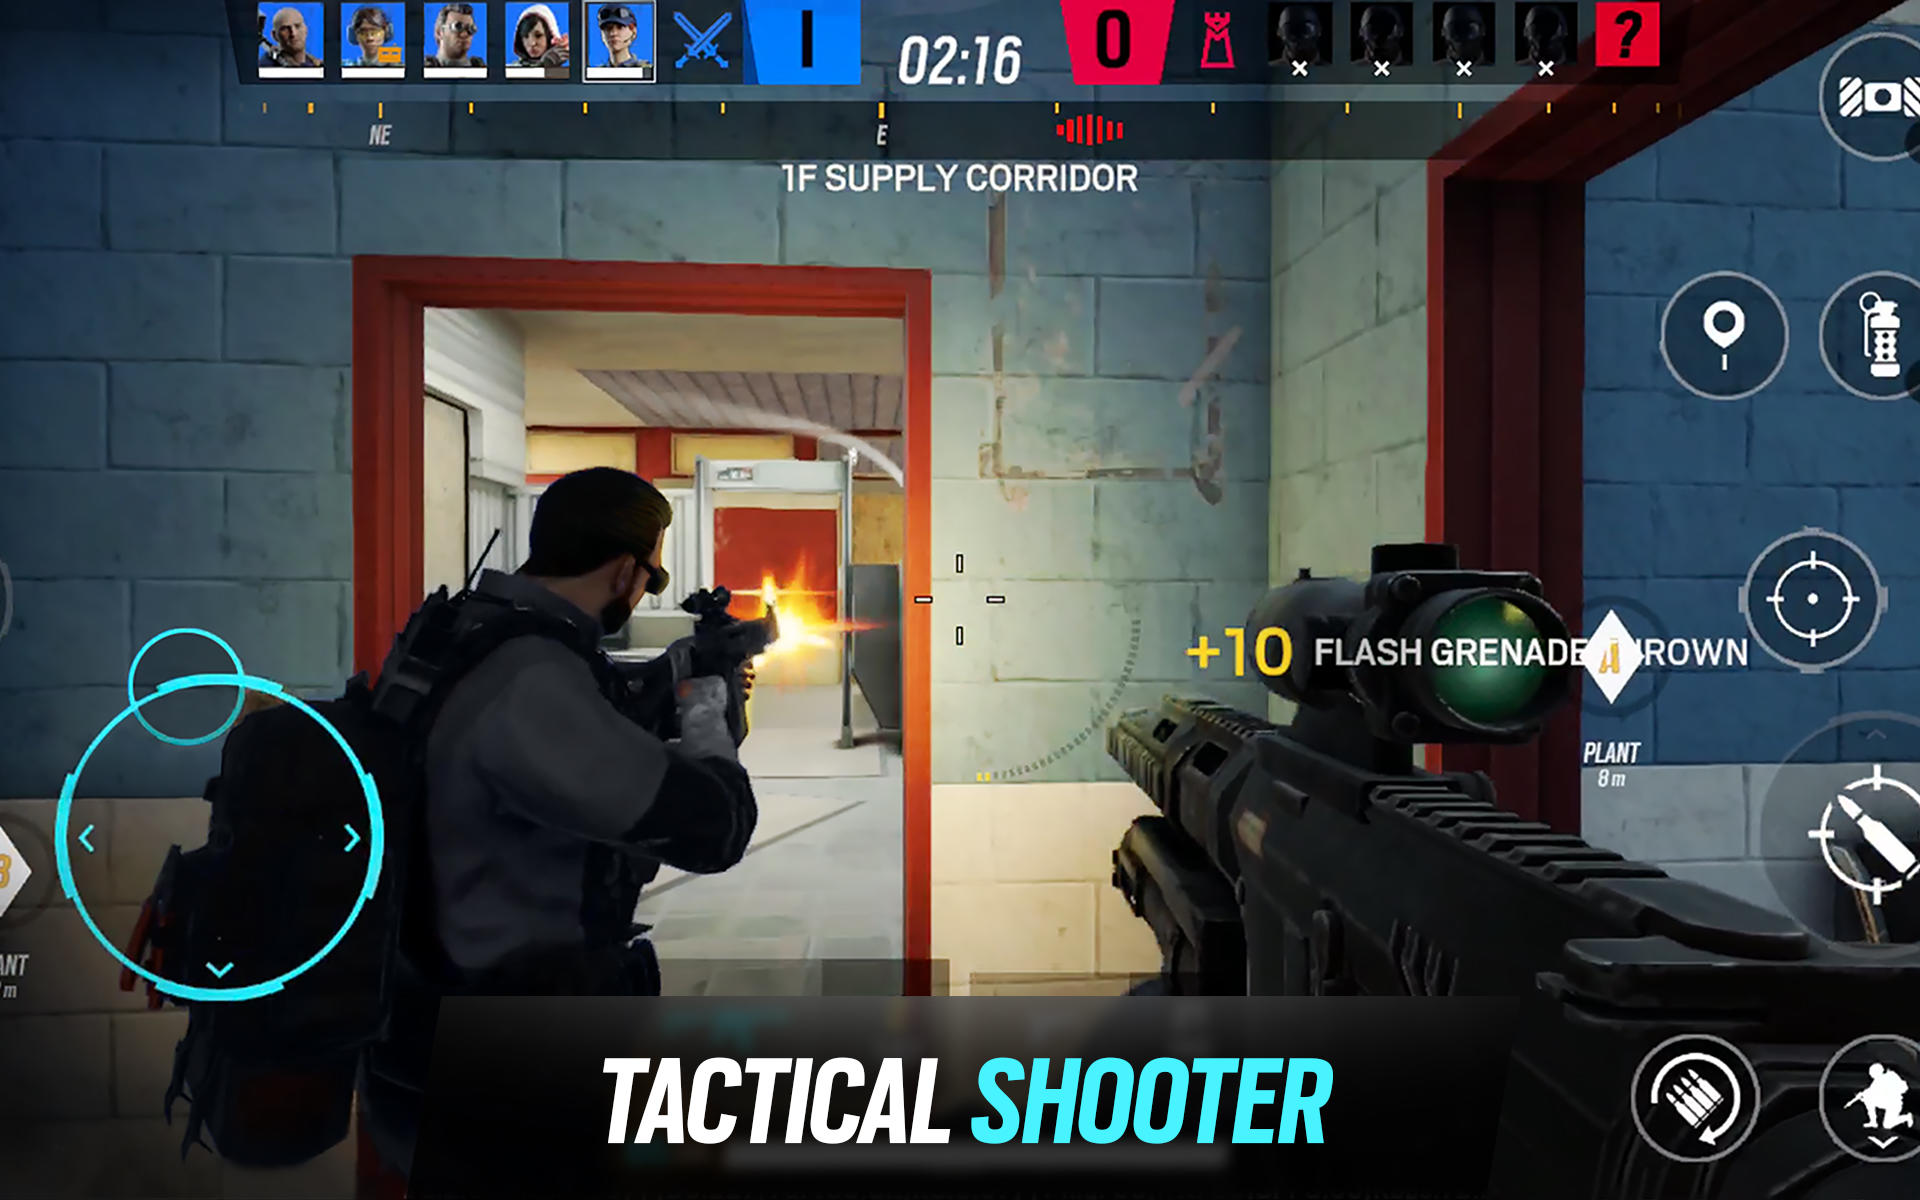 HOT NEWS 😻 : RAINBOW SIX SIEGE : MOBILE - LINK DOWNLOAD NOW - FULL GAMES 